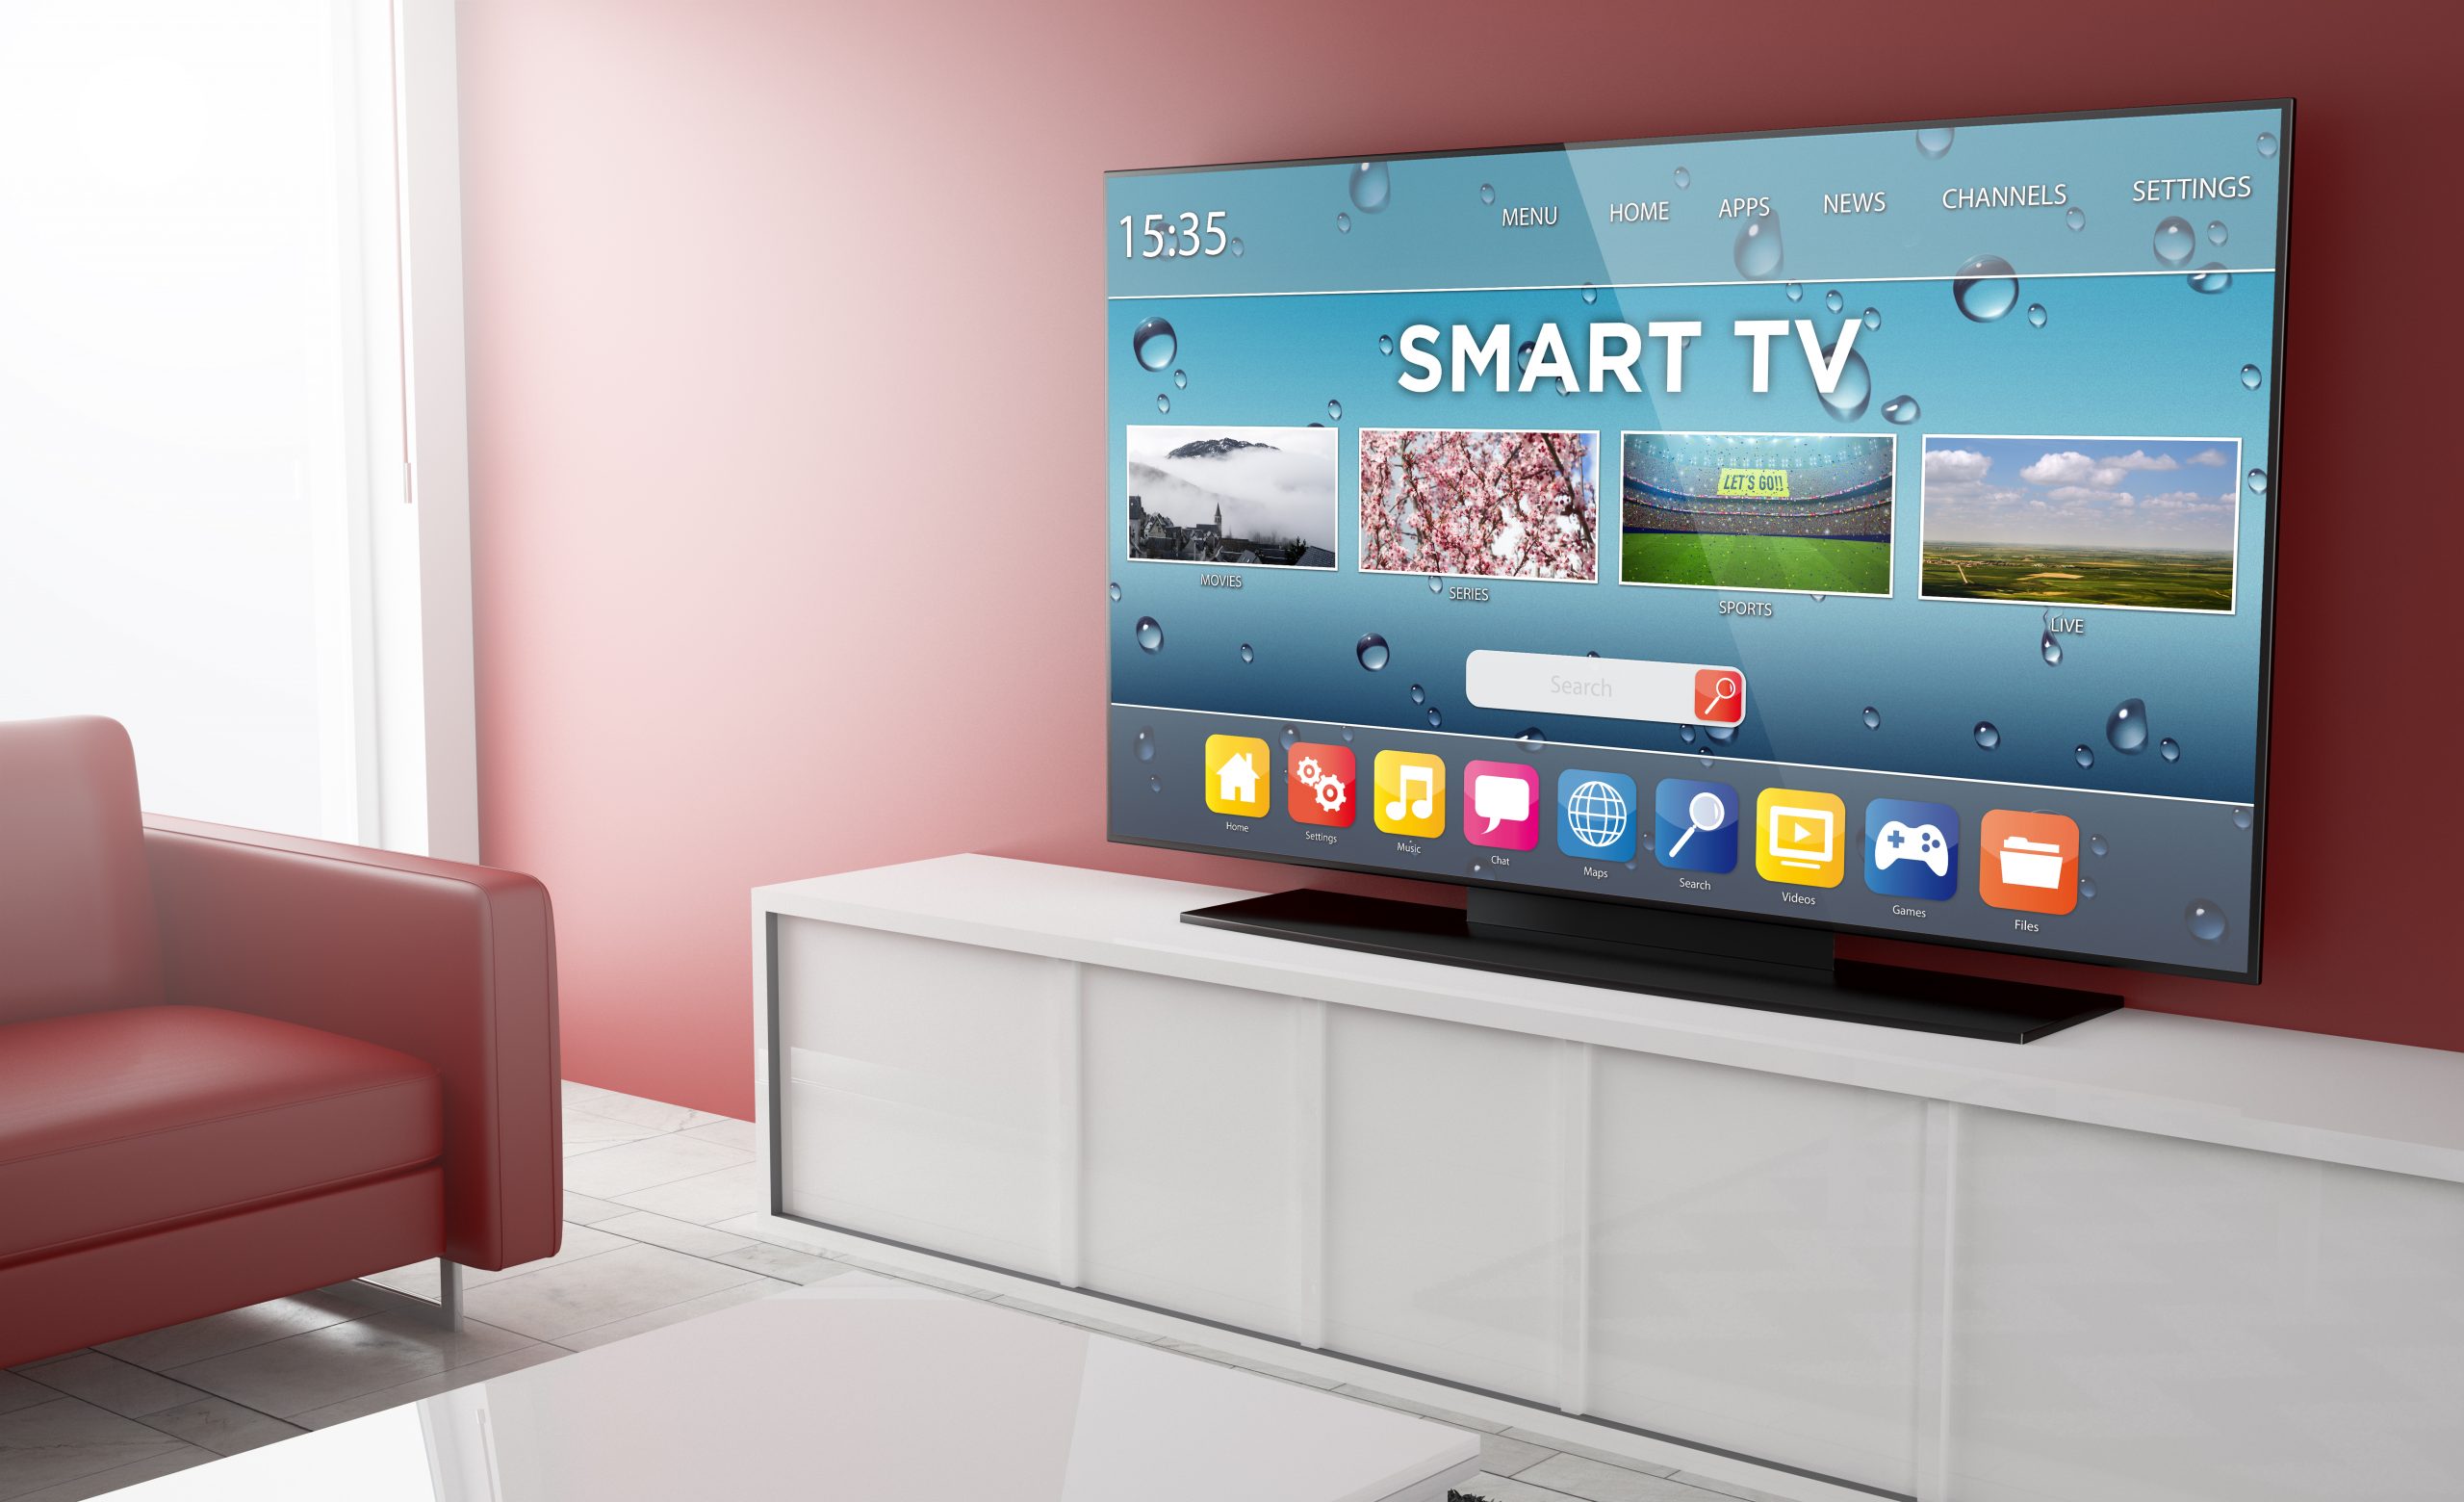 How To Install IpTV On Smart TV